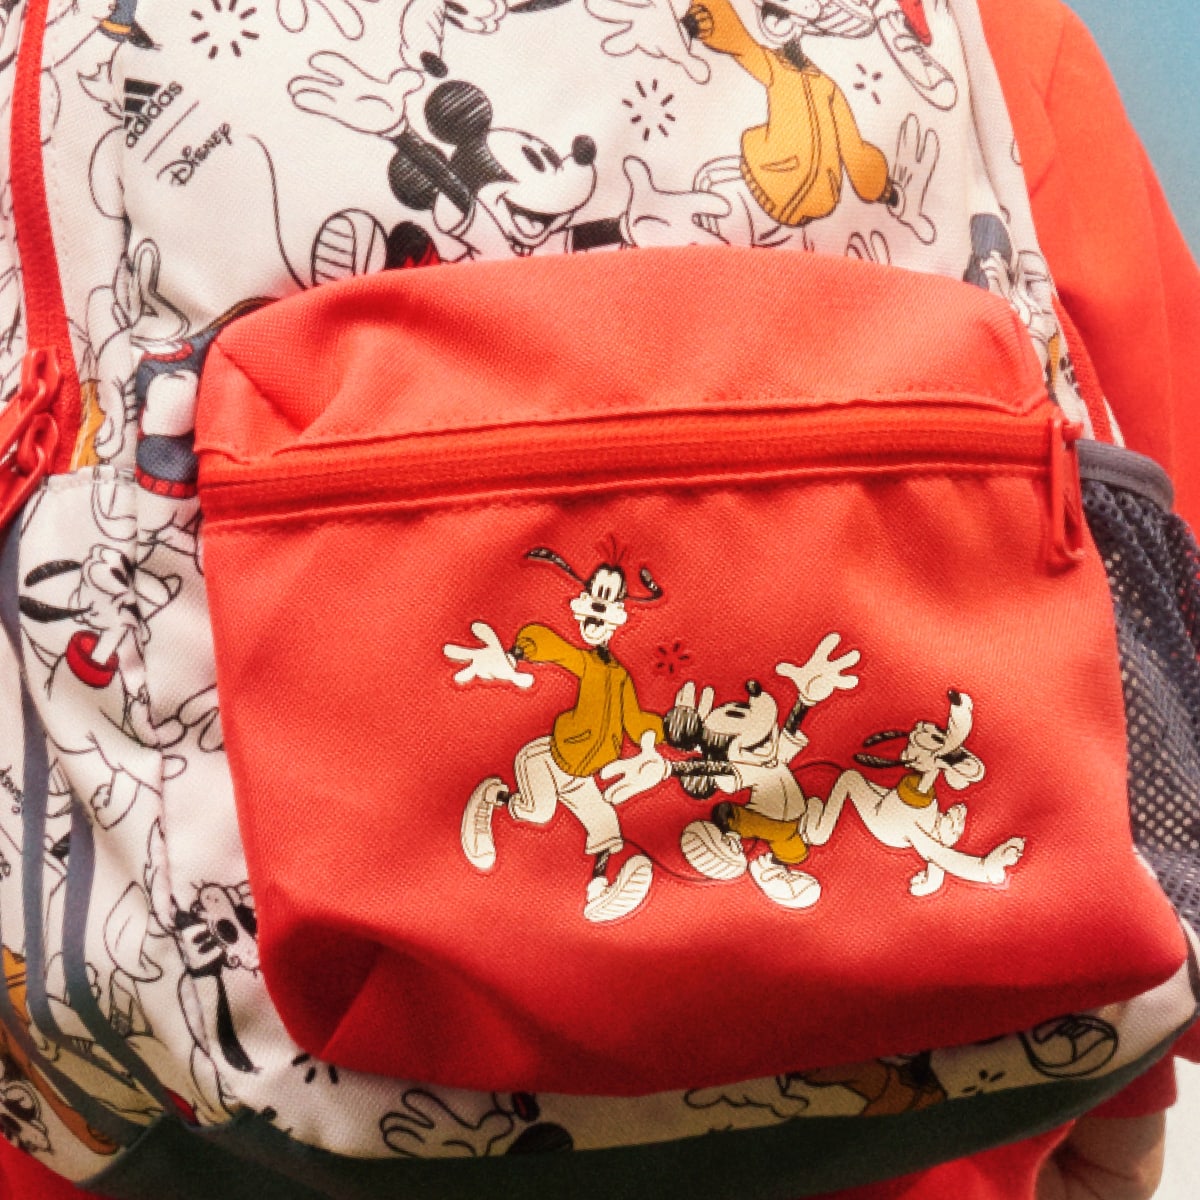 Adidas Disney's Mickey Mouse Backpack. 10